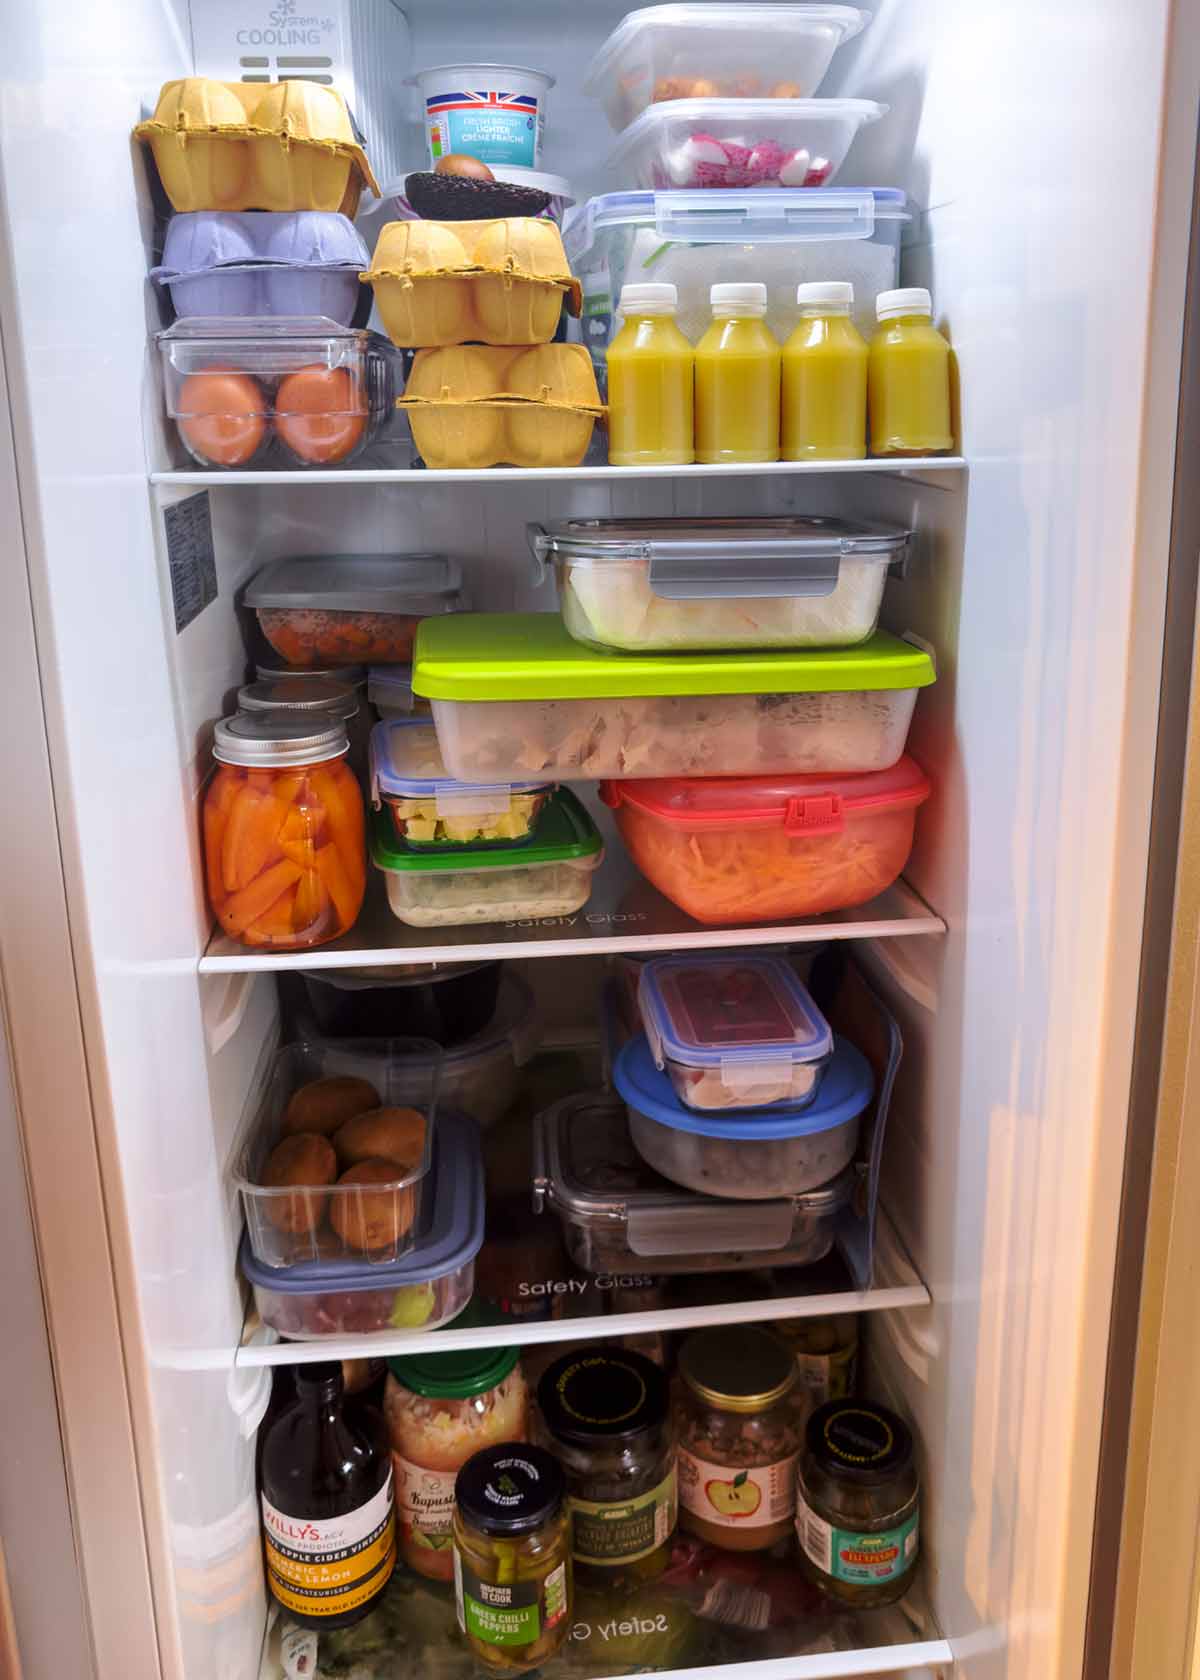 A tall fridge with shelves full of containers full of prepared fruit and vegetables.